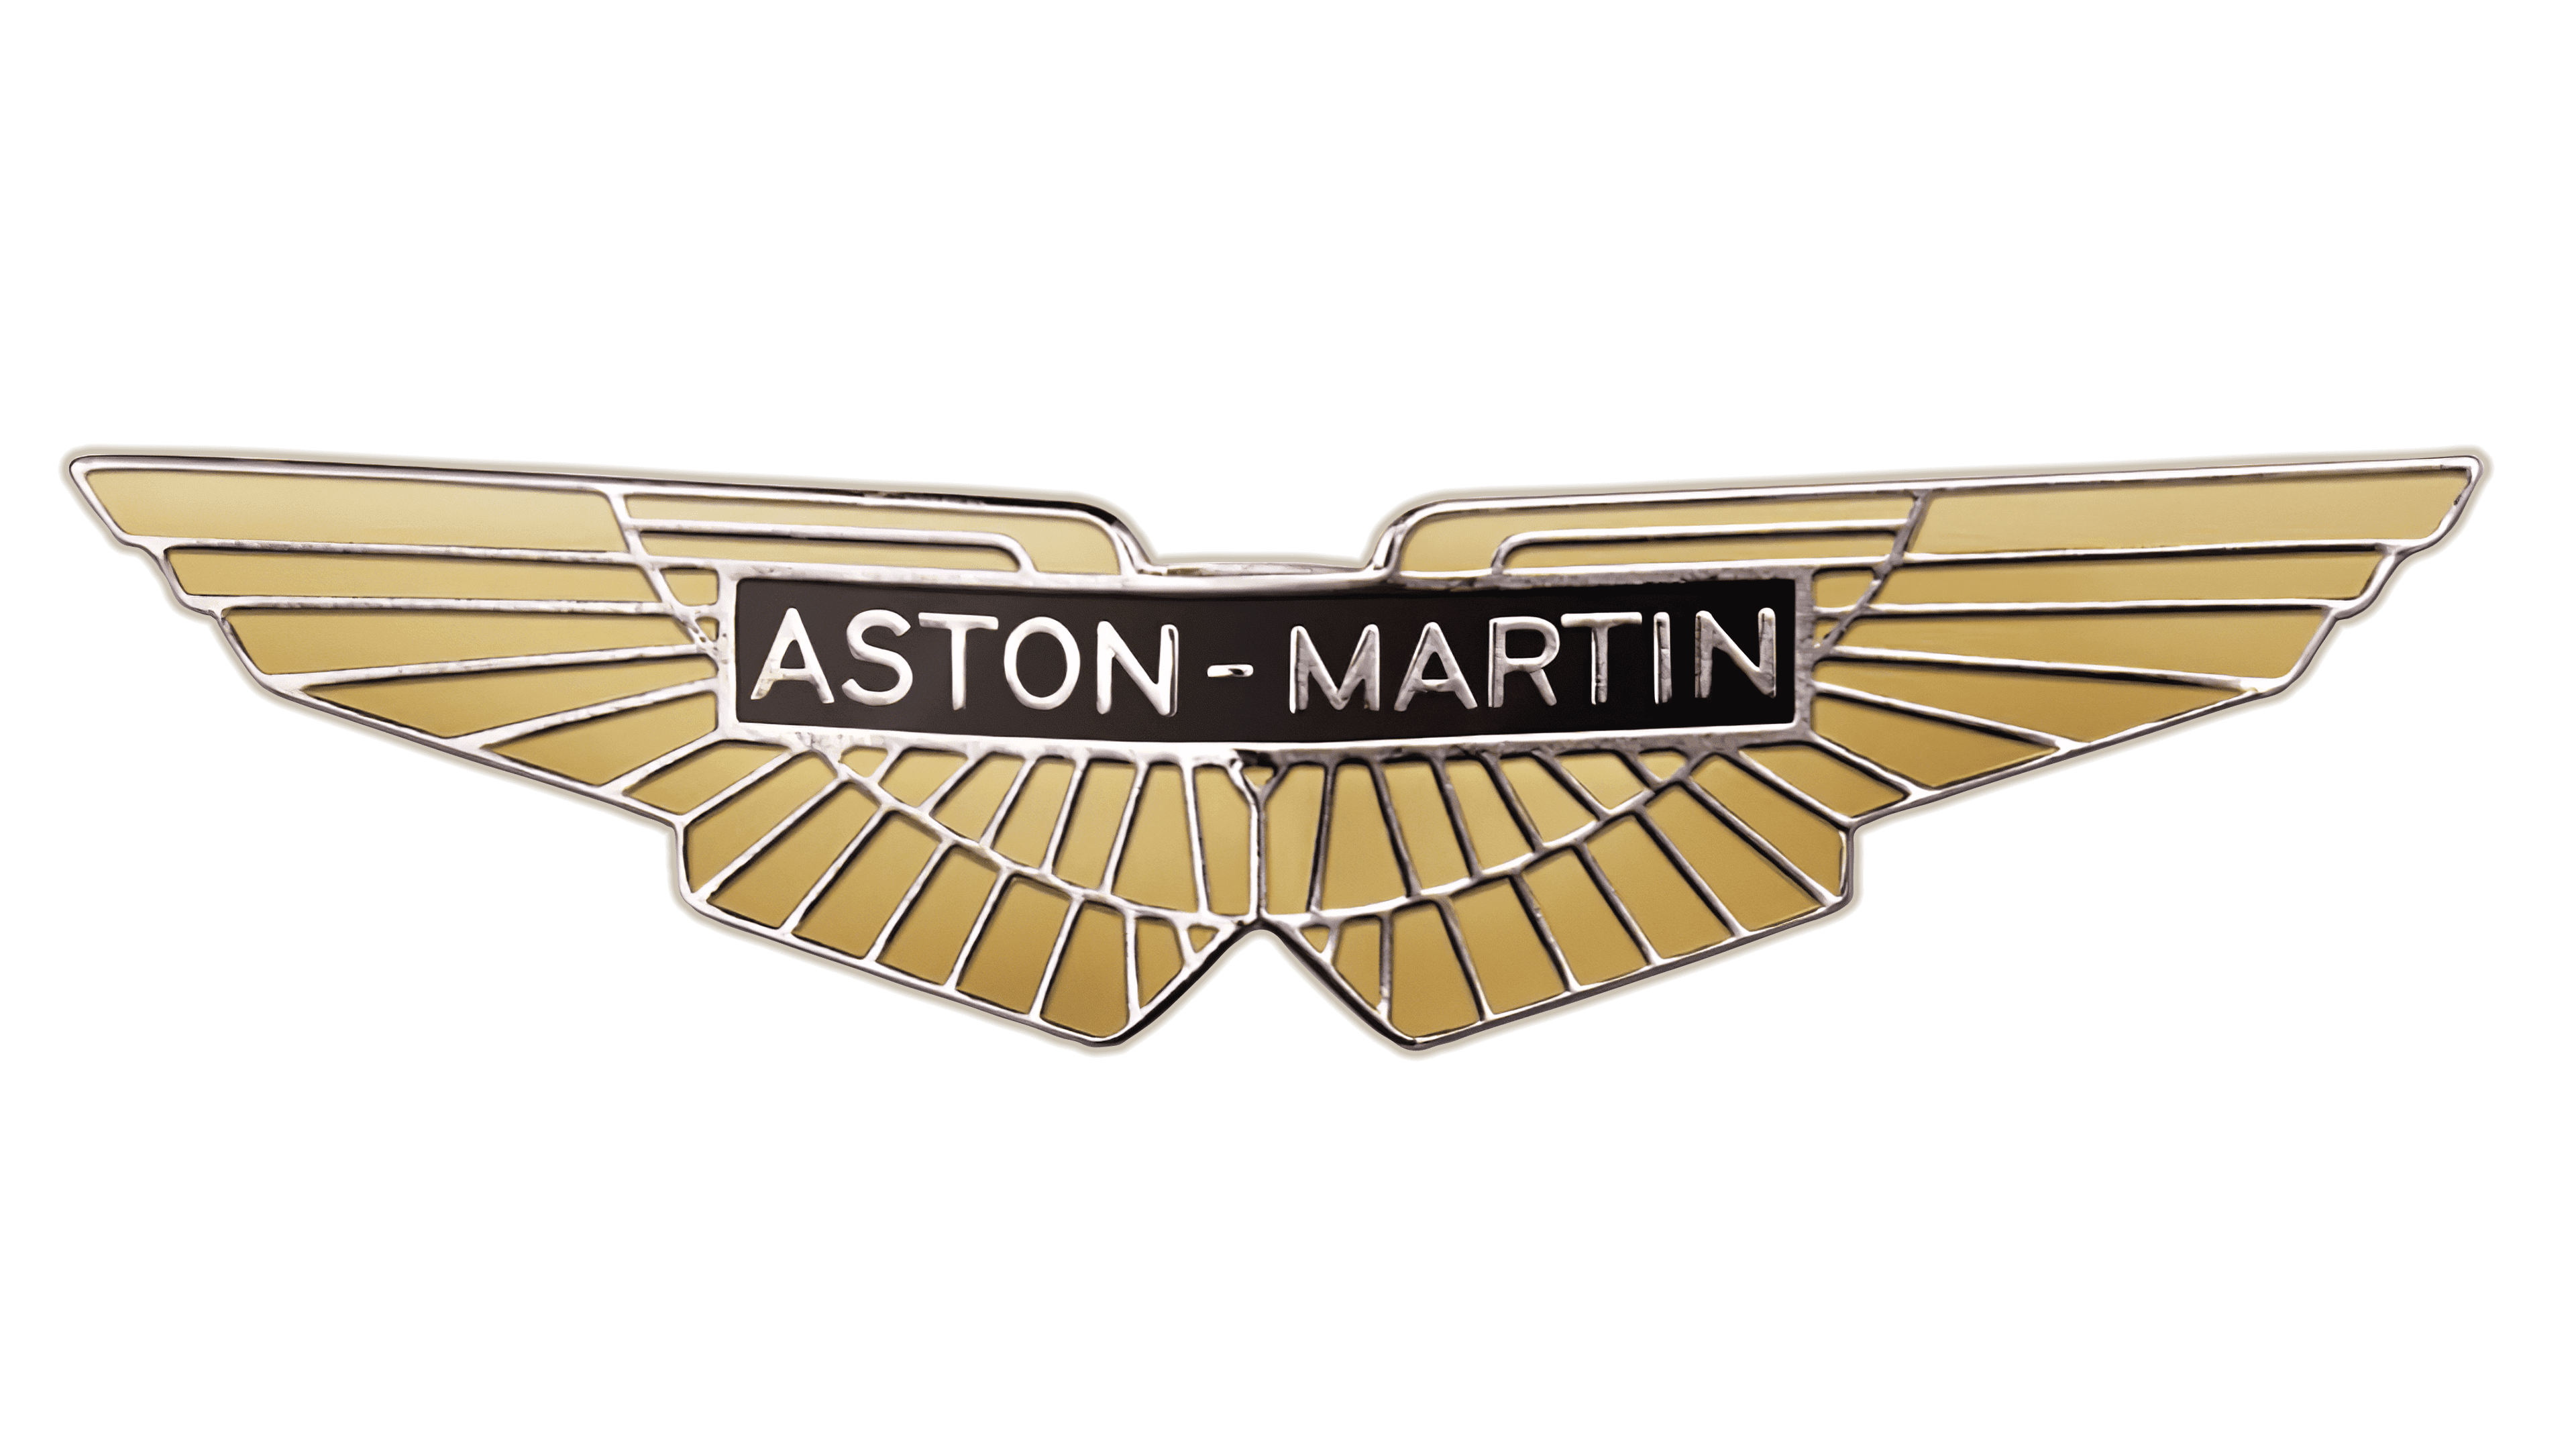 High Resolution Aston Martin Logo Png Spectaculer Car | Images and ...